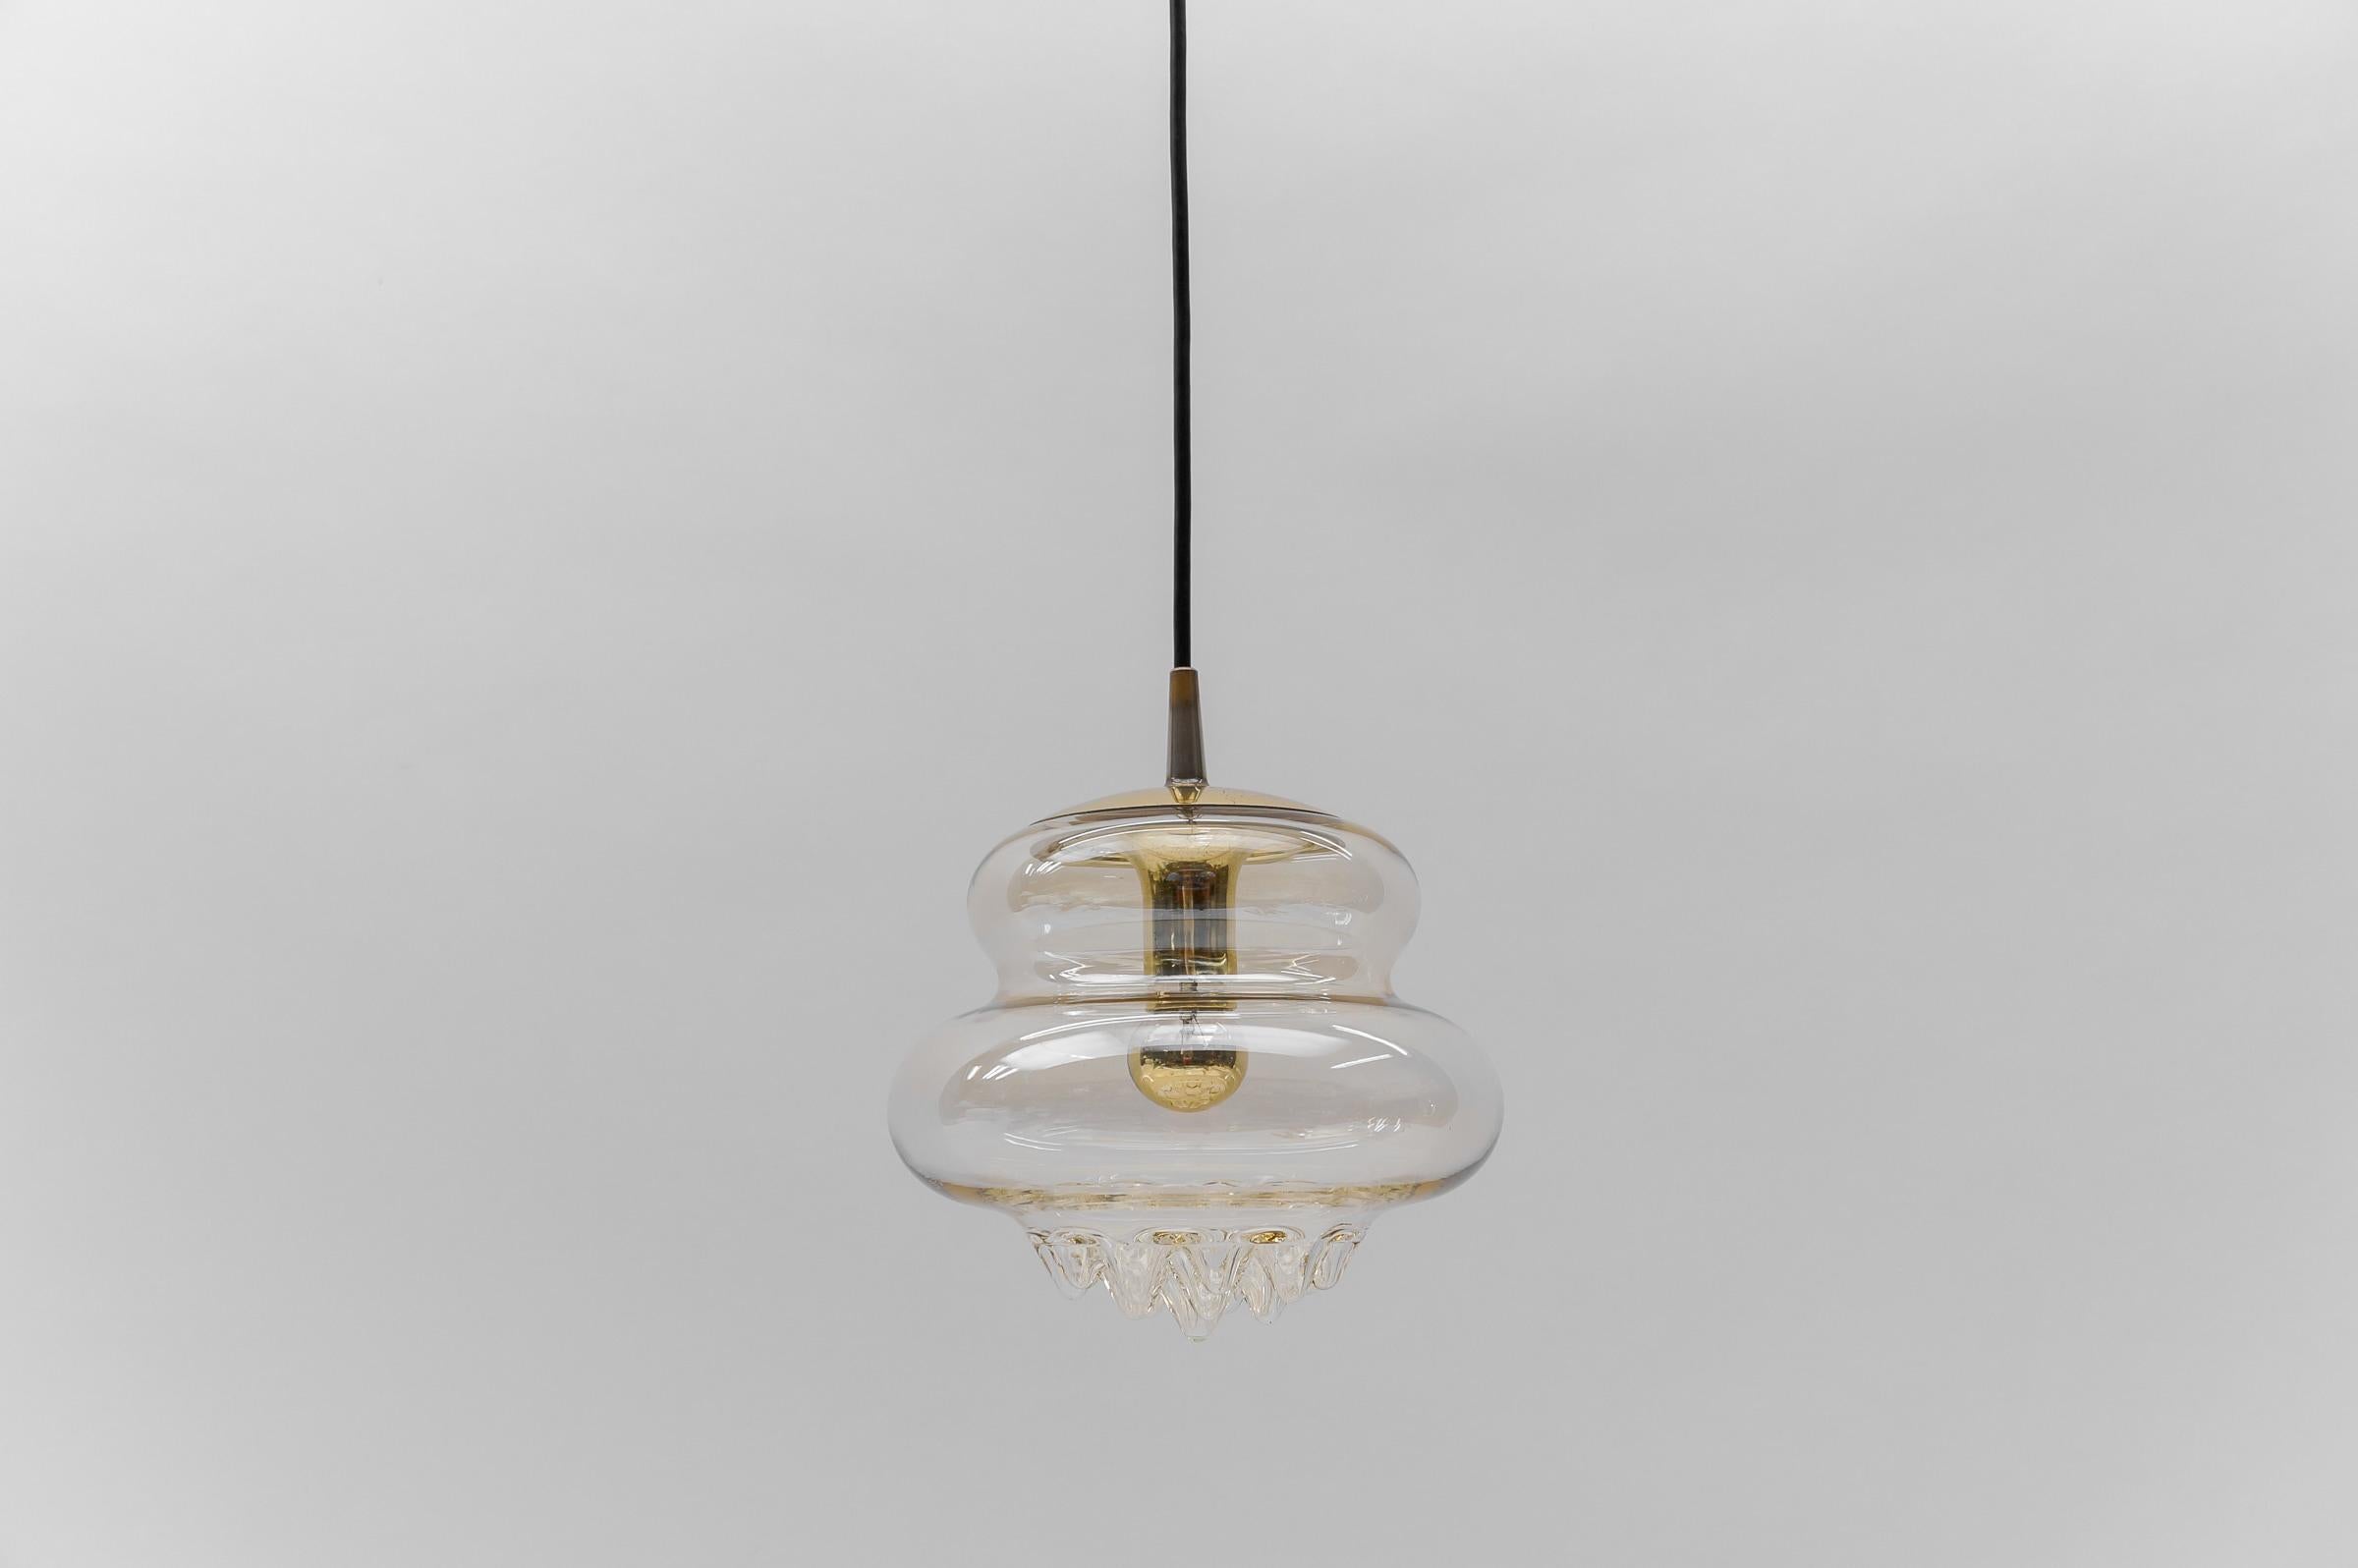 Lovely Glass Drops Ceiling Lamp by Peill & Putzler, 1970s

The lamp need 1x E27 / E26 Edison screw fit bulb, is wired, in working condition and runs both on 110 / 230 volt.

Light bulbs are not included.

It is possible to install this fixture in